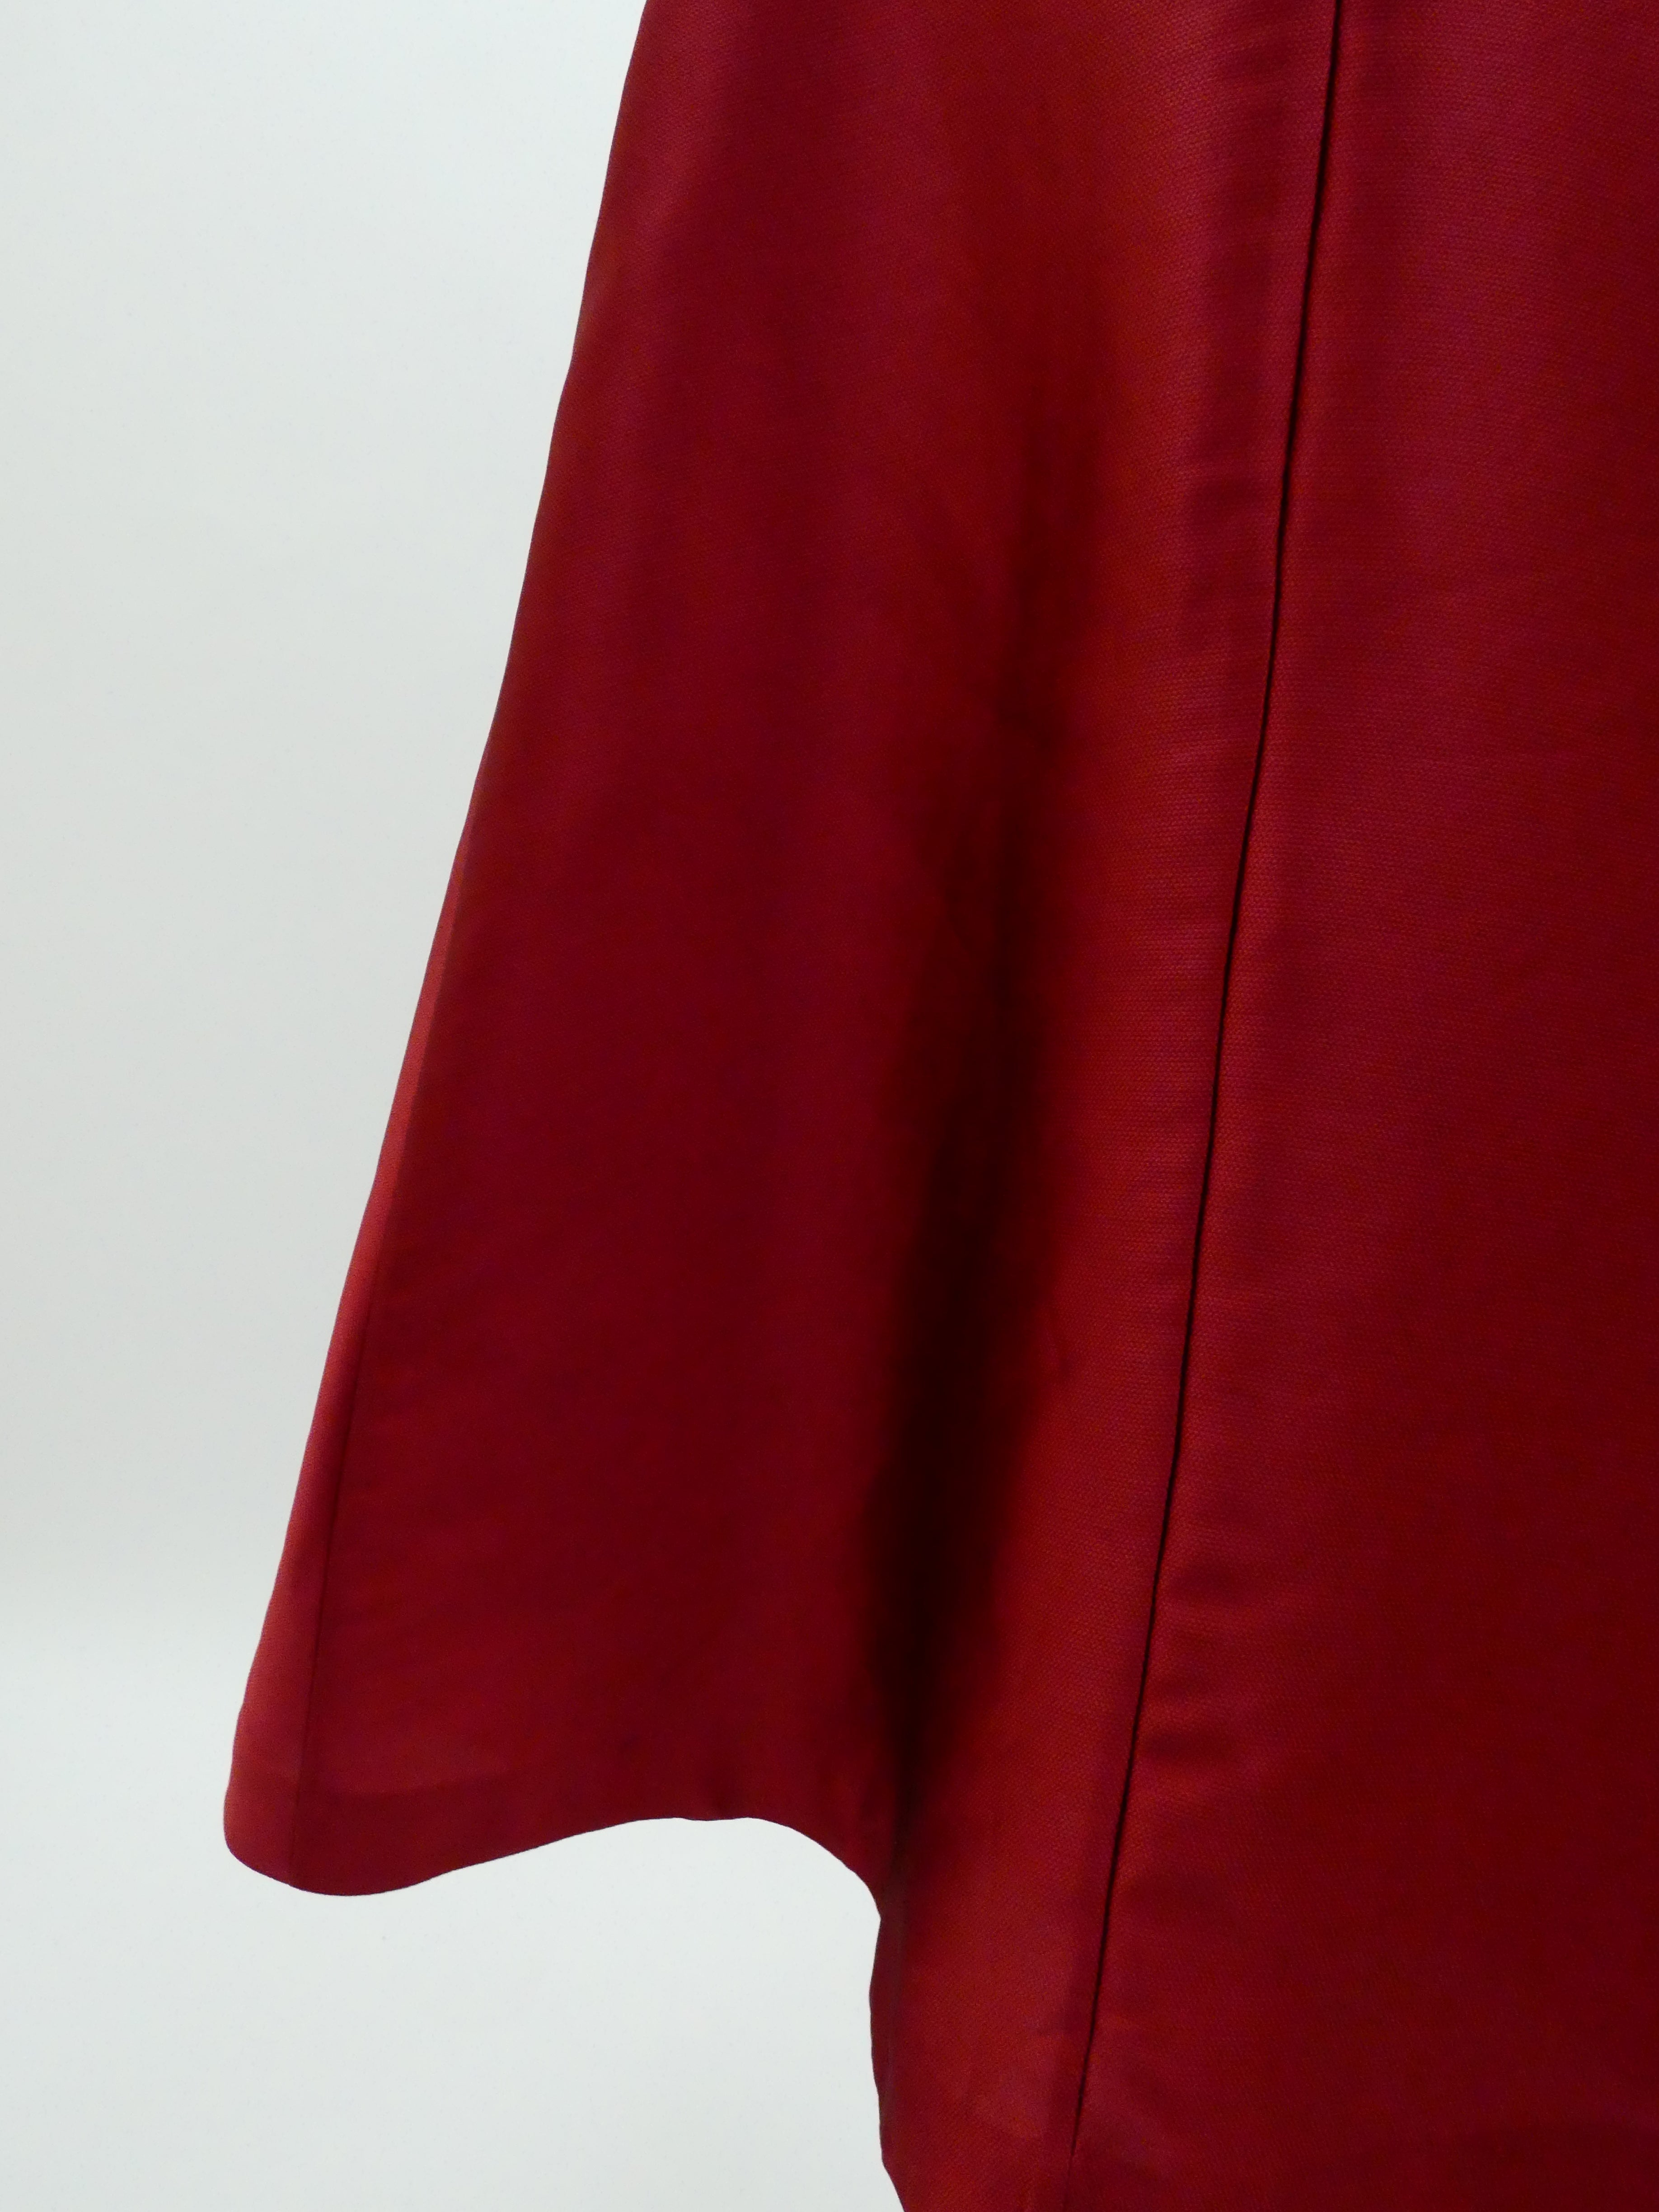 SILK FLARED COUTURE RED SKIRT